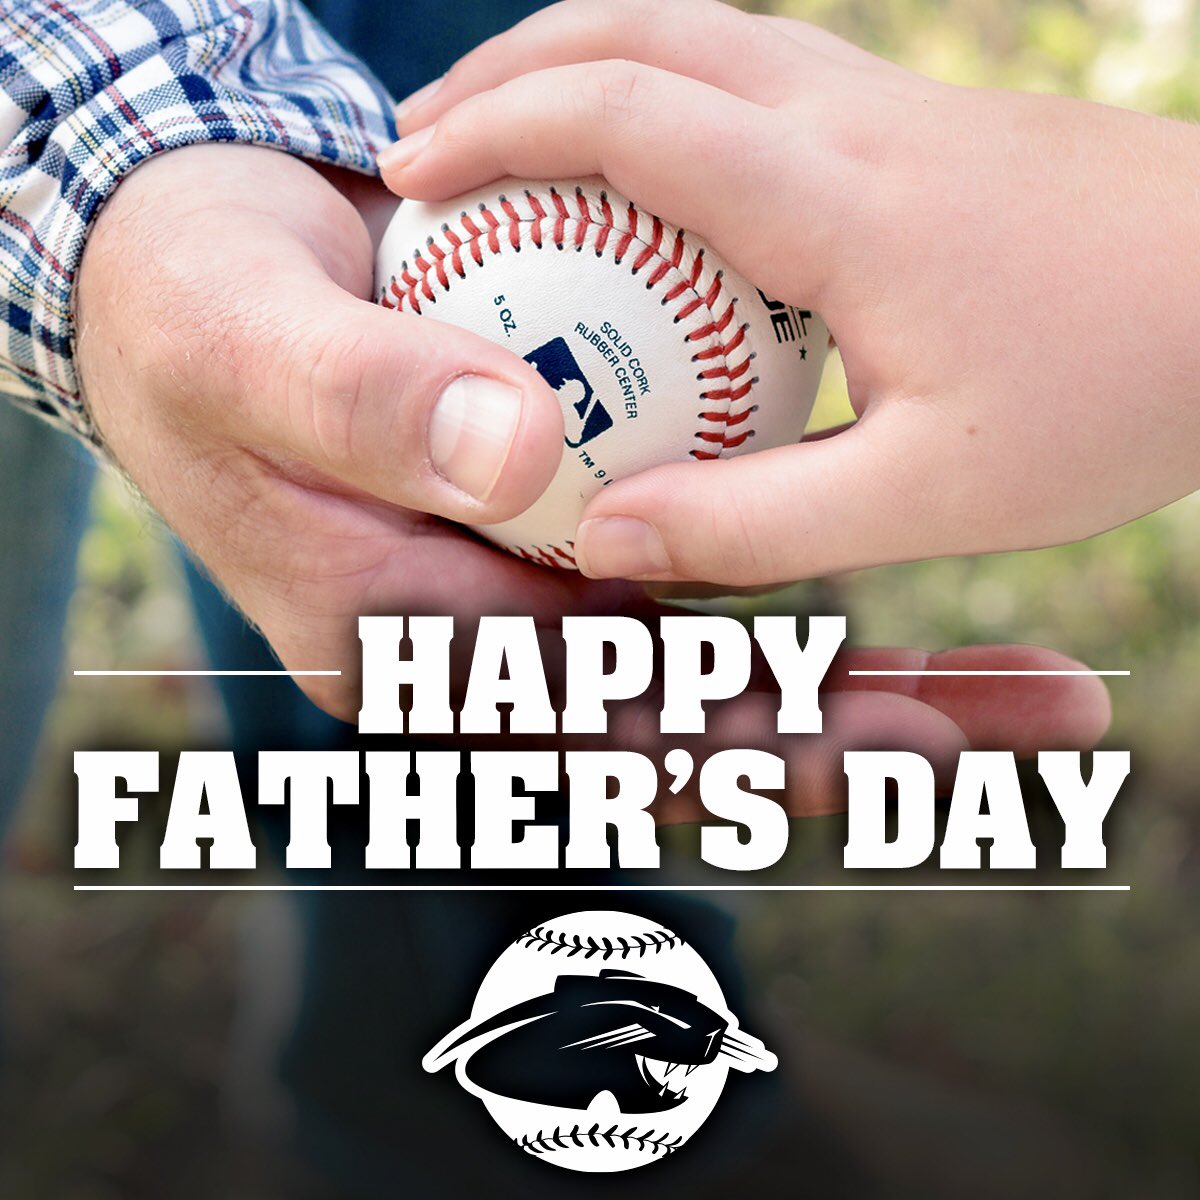 #HappyFathersDay to all the fathers, baseball dads, coaches & volunteers. Relax & enjoy your day but don't forget, we still have a lot more #baseball to play!

#midlandpark #midlandparkbaseball #panthersbaseball #nj #njbaseball #panthers #midlandparkpanthers #fathersday